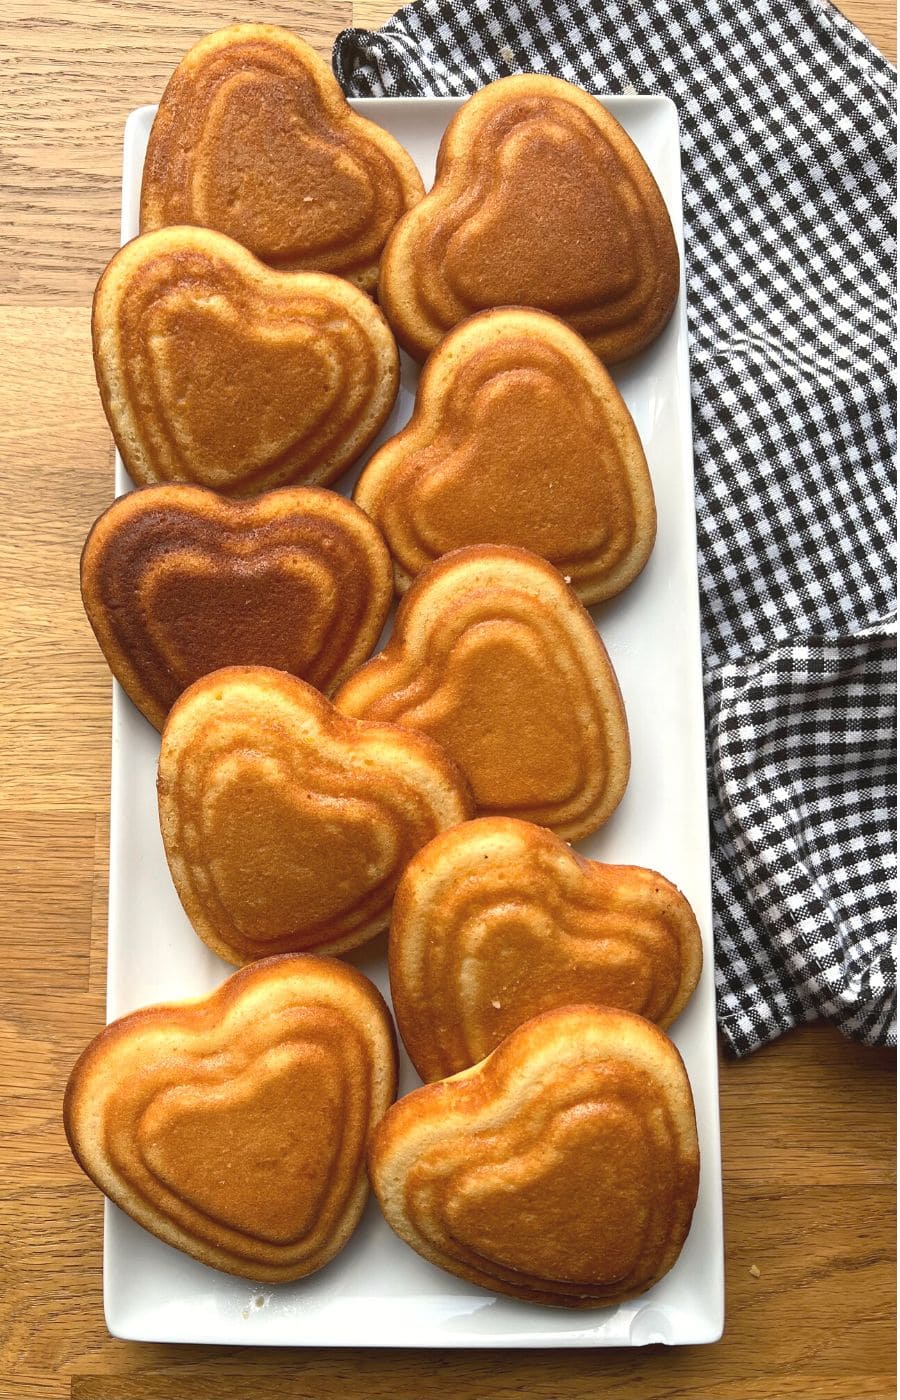 Cooled mini heart cakes on white plate with teatowel.